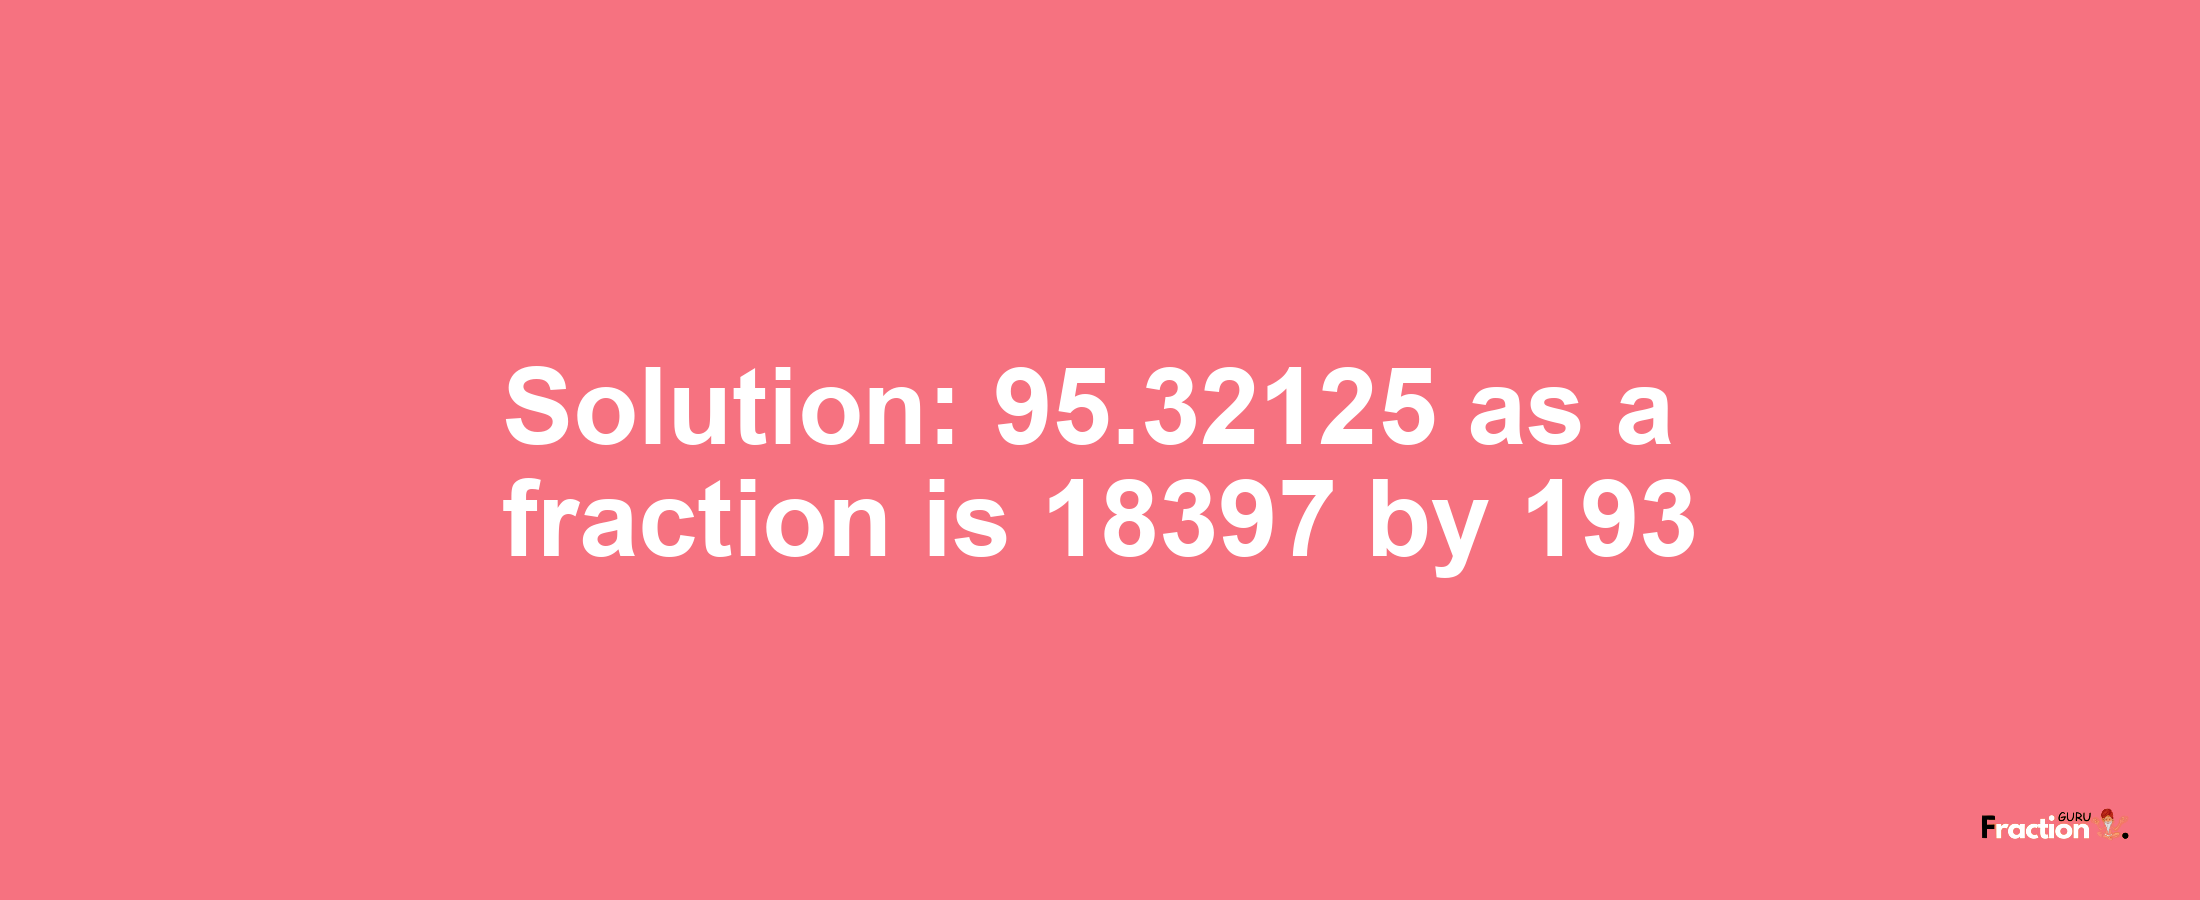 Solution:95.32125 as a fraction is 18397/193